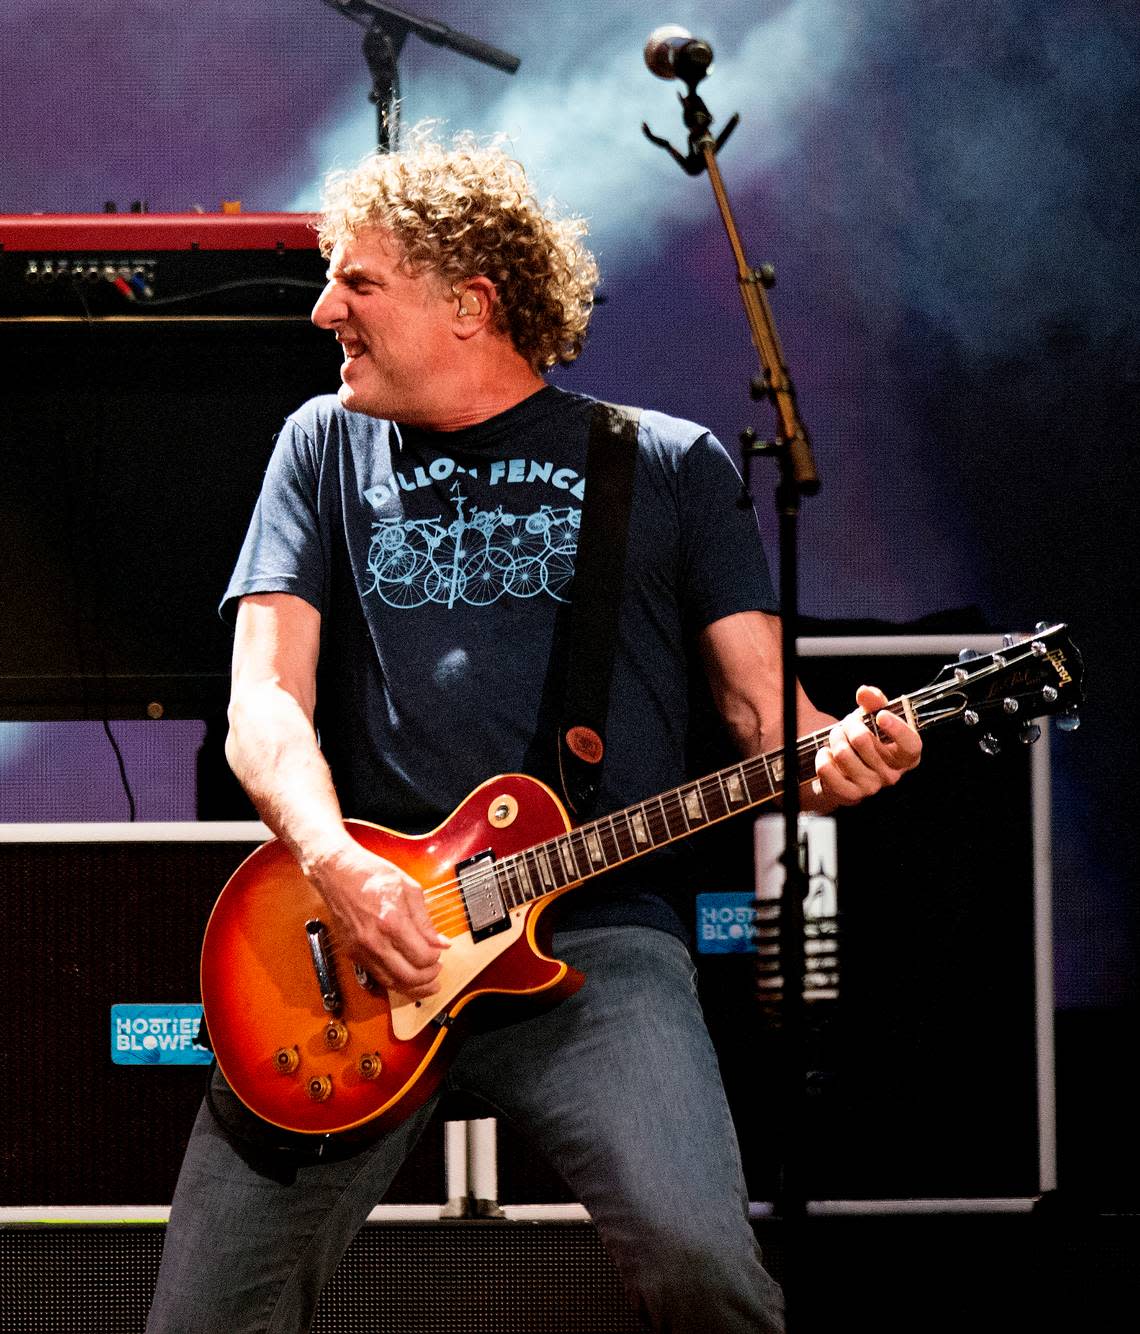 Hootie and the Blowfish lead guitar player Mark Bryan shreds in concert Friday night, Feb. 17, 2023 in Raleigh.